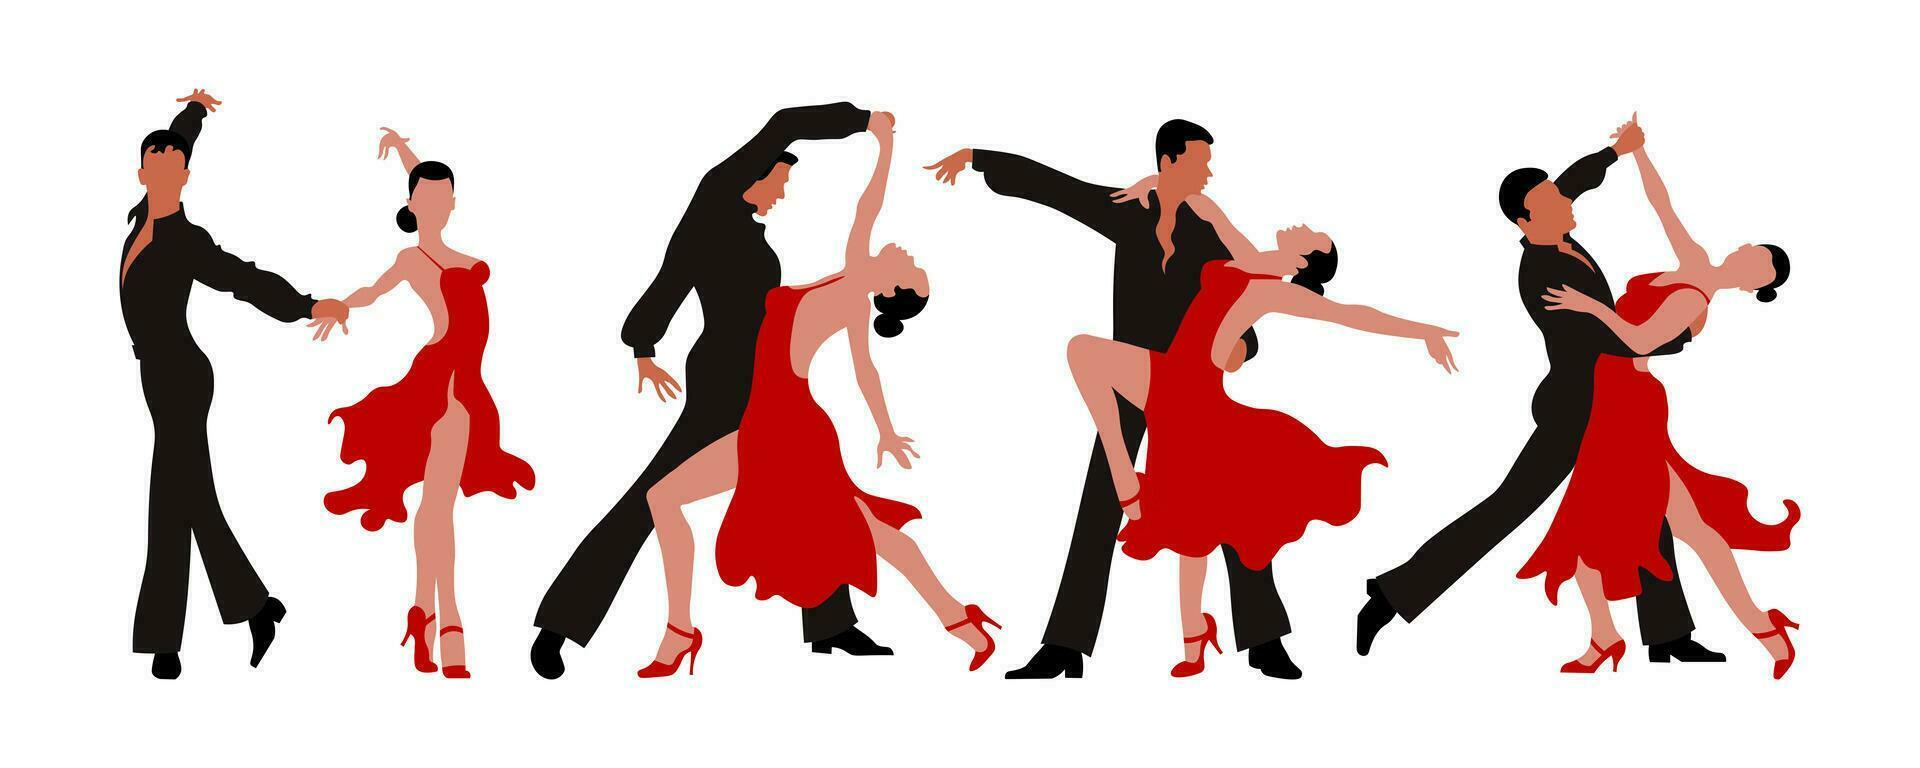 Dancing couples set. Man and woman dancing tango or waltz. Red and black design. Illustration, vector